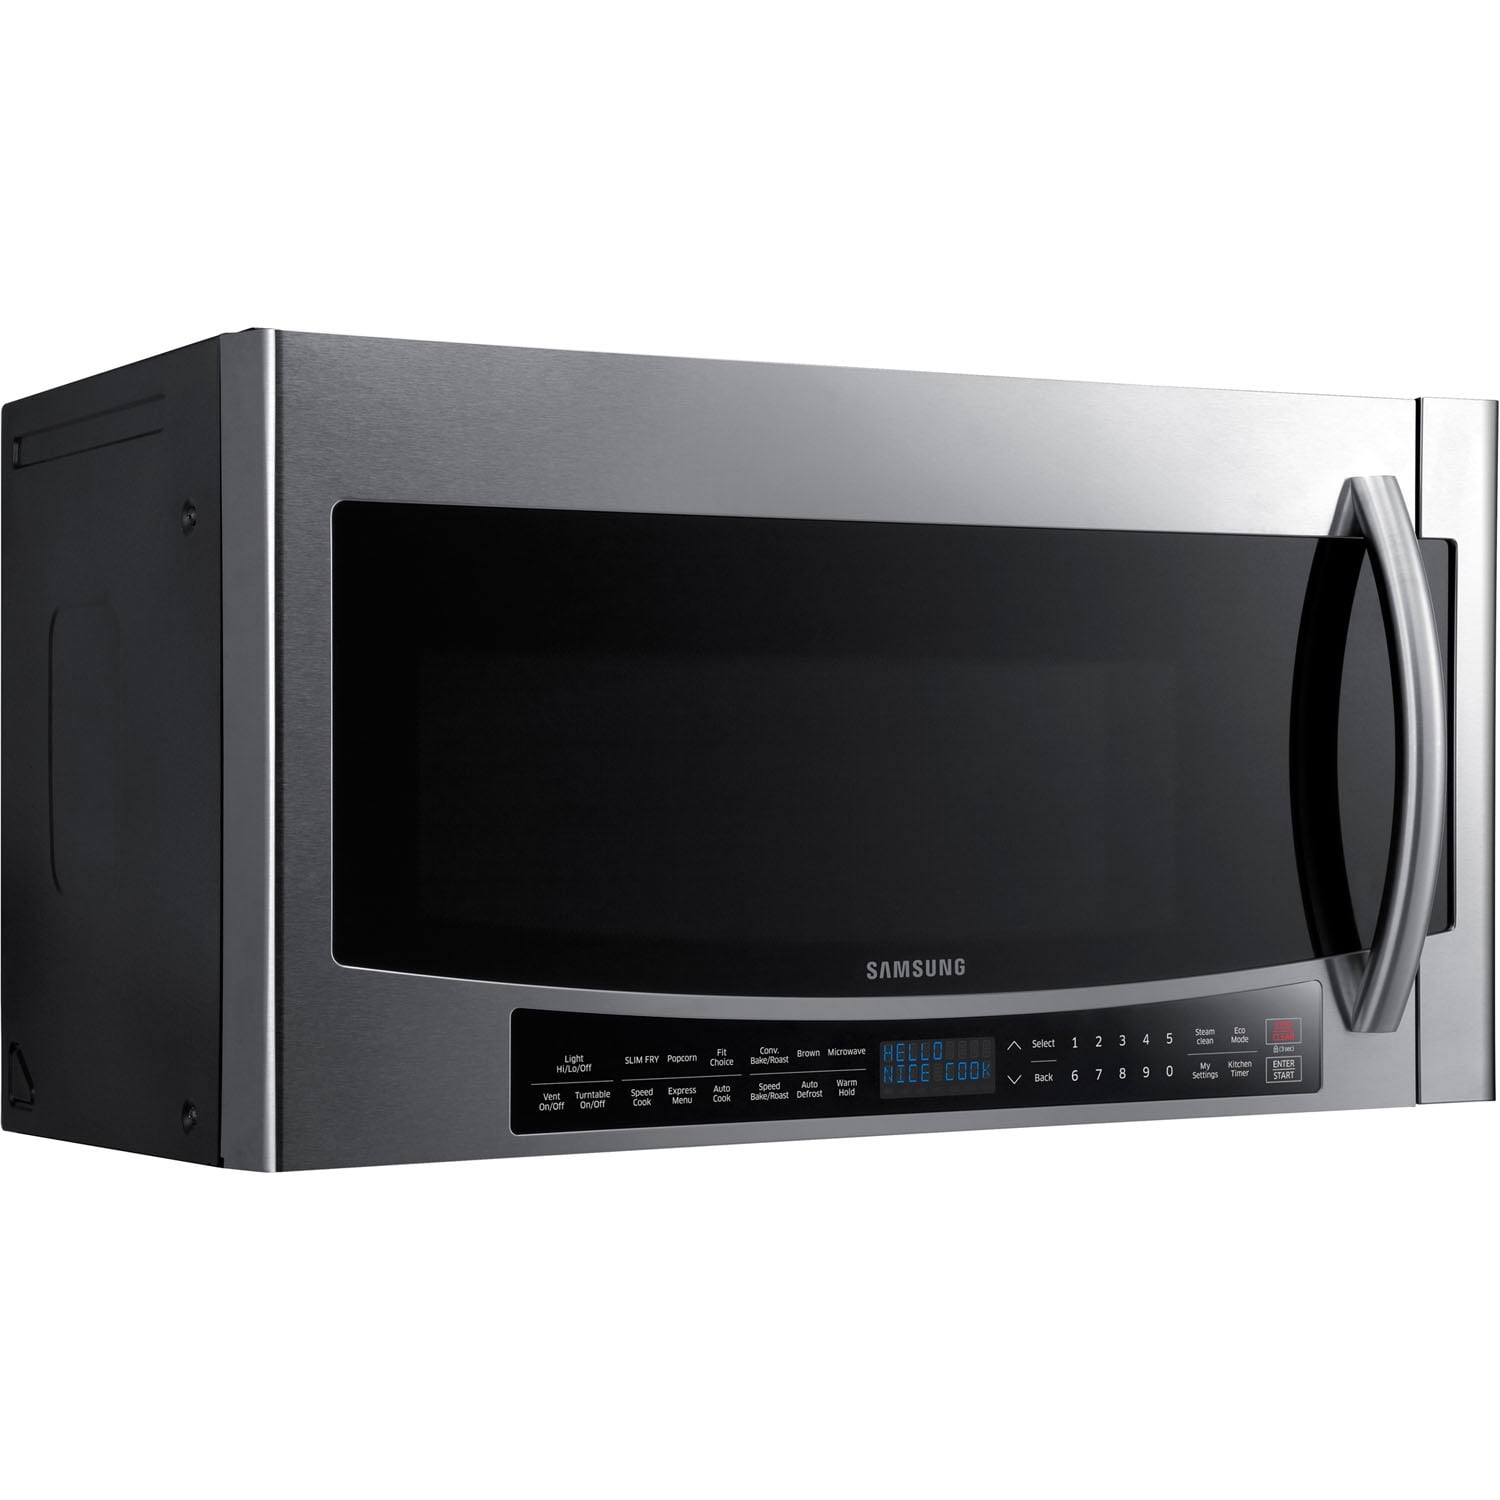 Samsung 1.7 Cu. Ft. Over The Range Convection Microwave- Stainless Steel